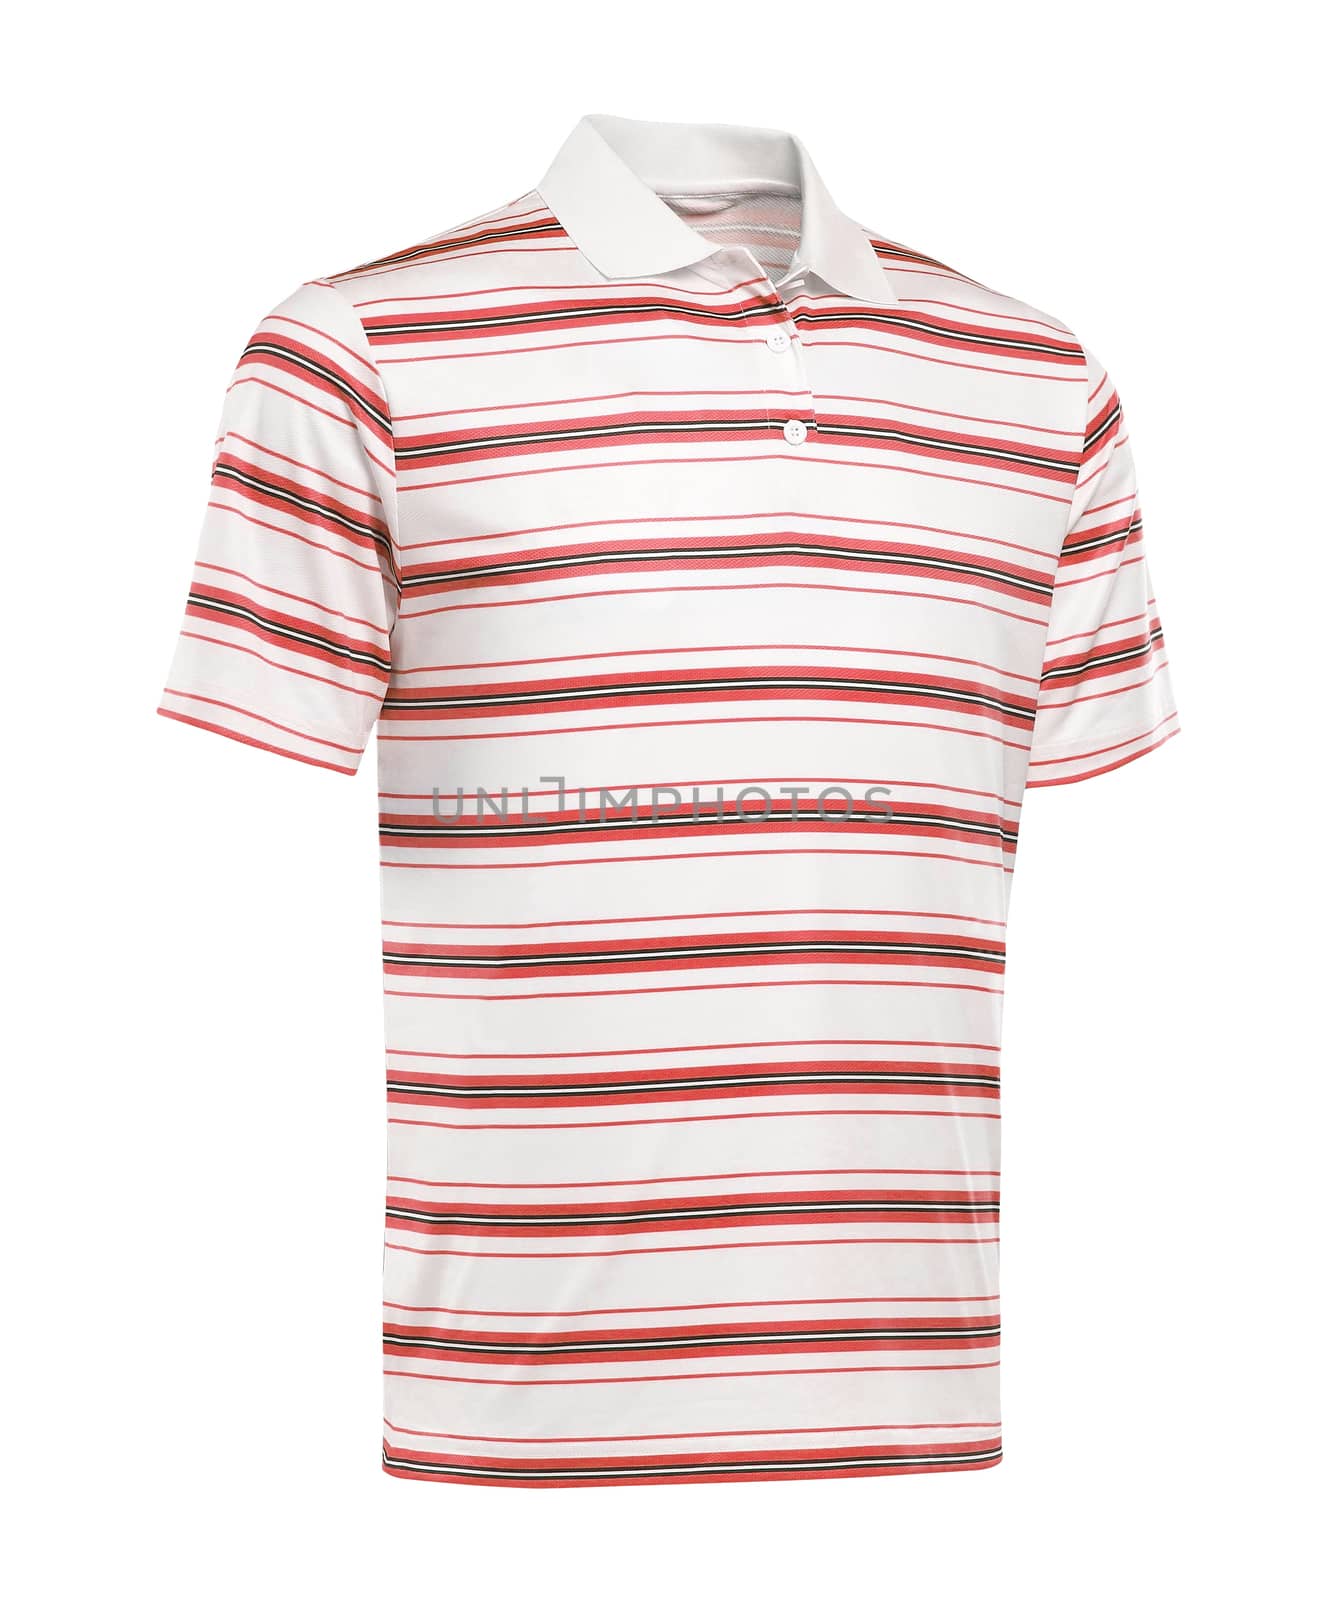 red and white striped t-shirt by ozaiachin